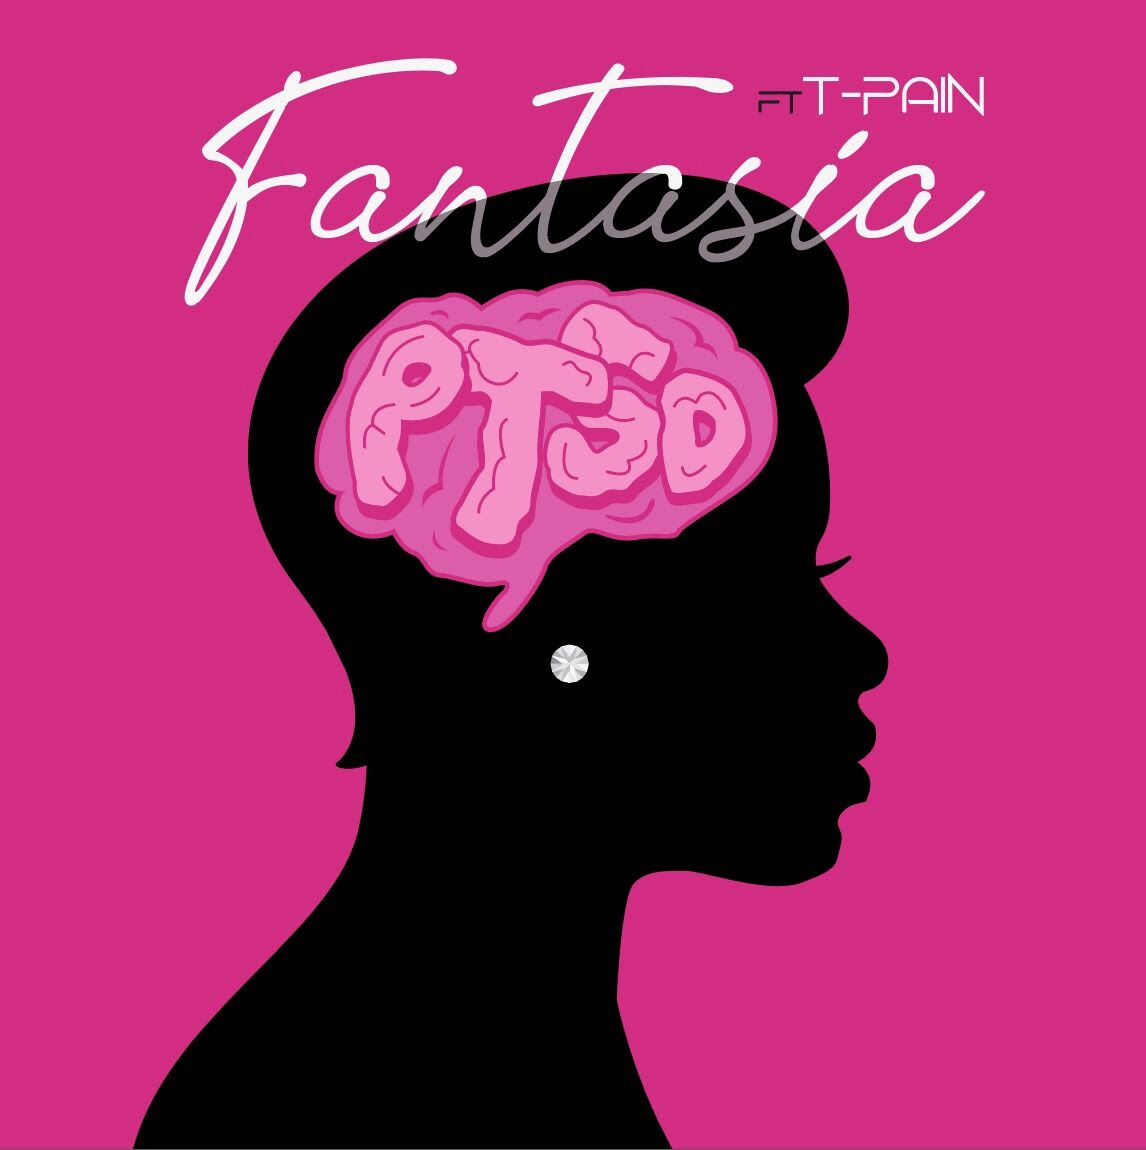 FANTASIA RETURNS WITH SINGLE “PTSD” FEATURING T-PAIN